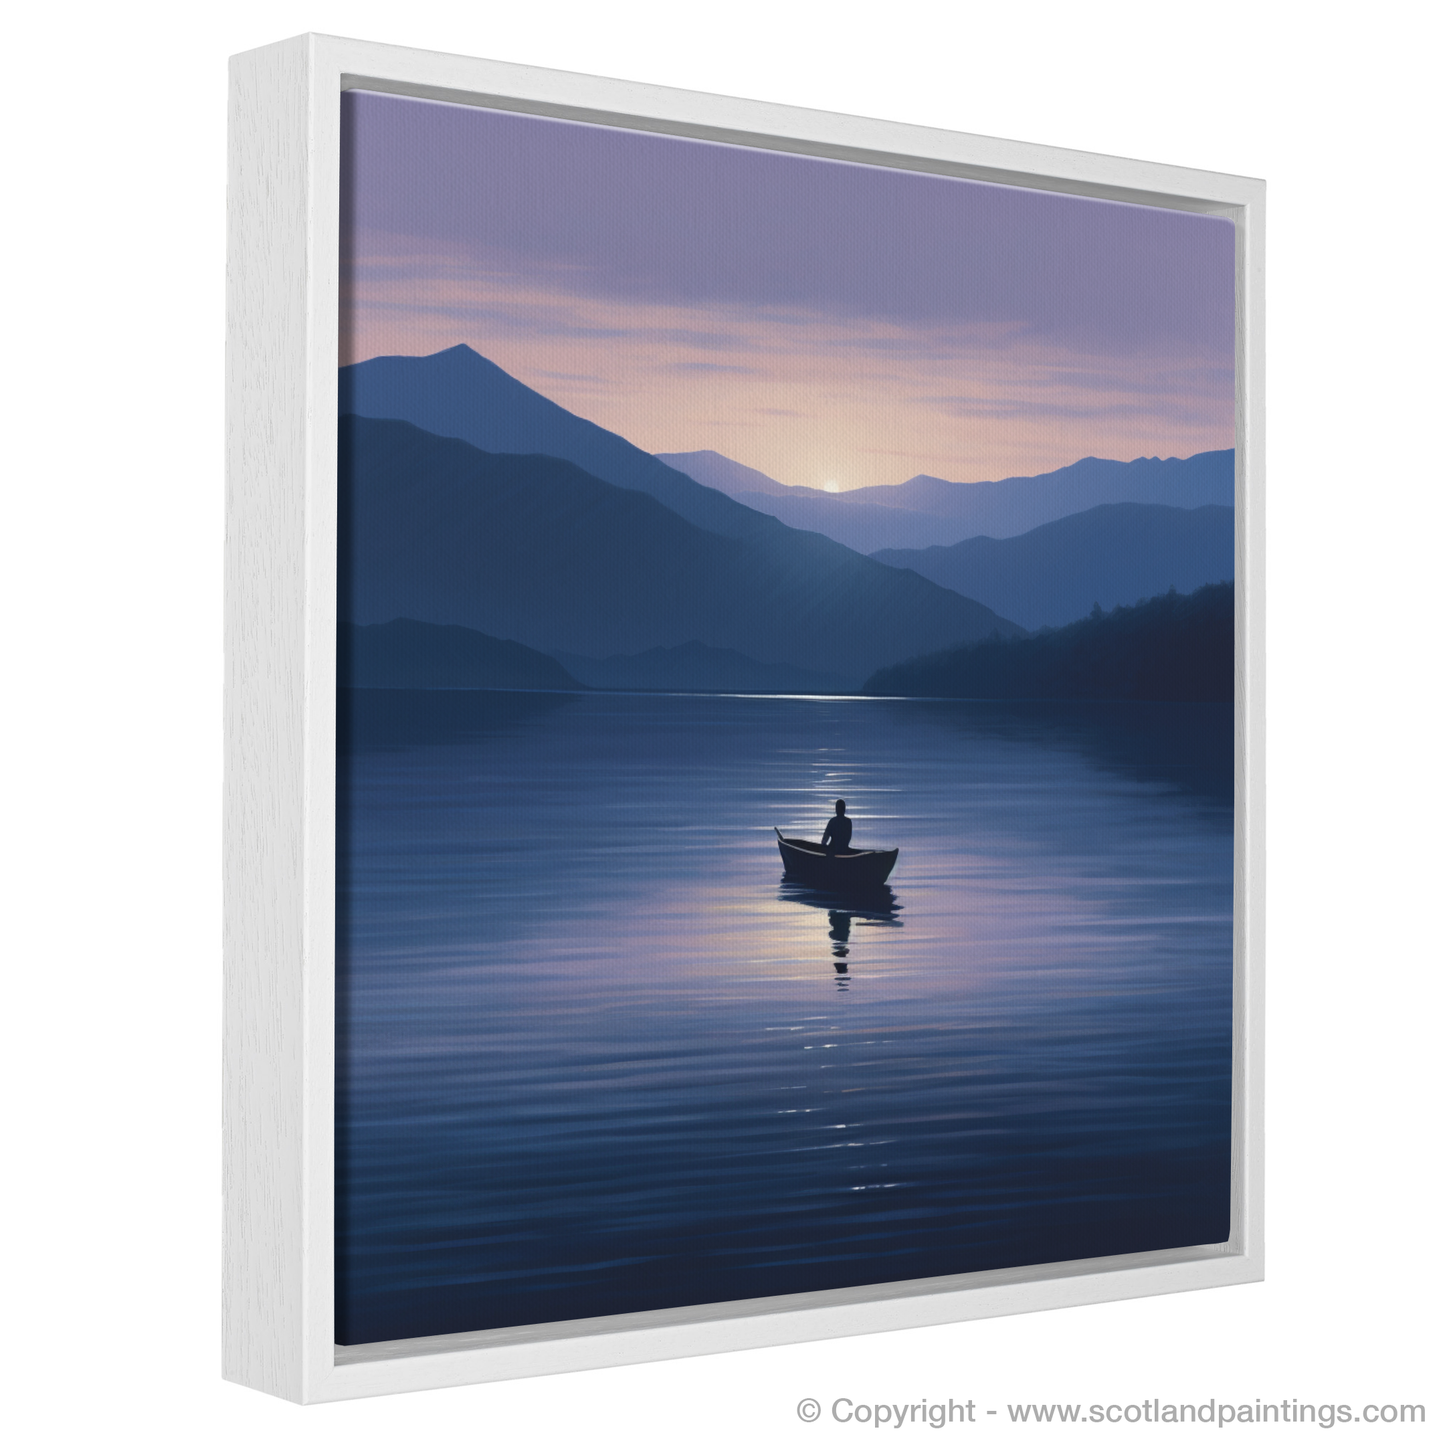 Painting and Art Print of Lone rowboat on Loch Lomond at dusk entitled "Twilight Serenity on Loch Lomond".